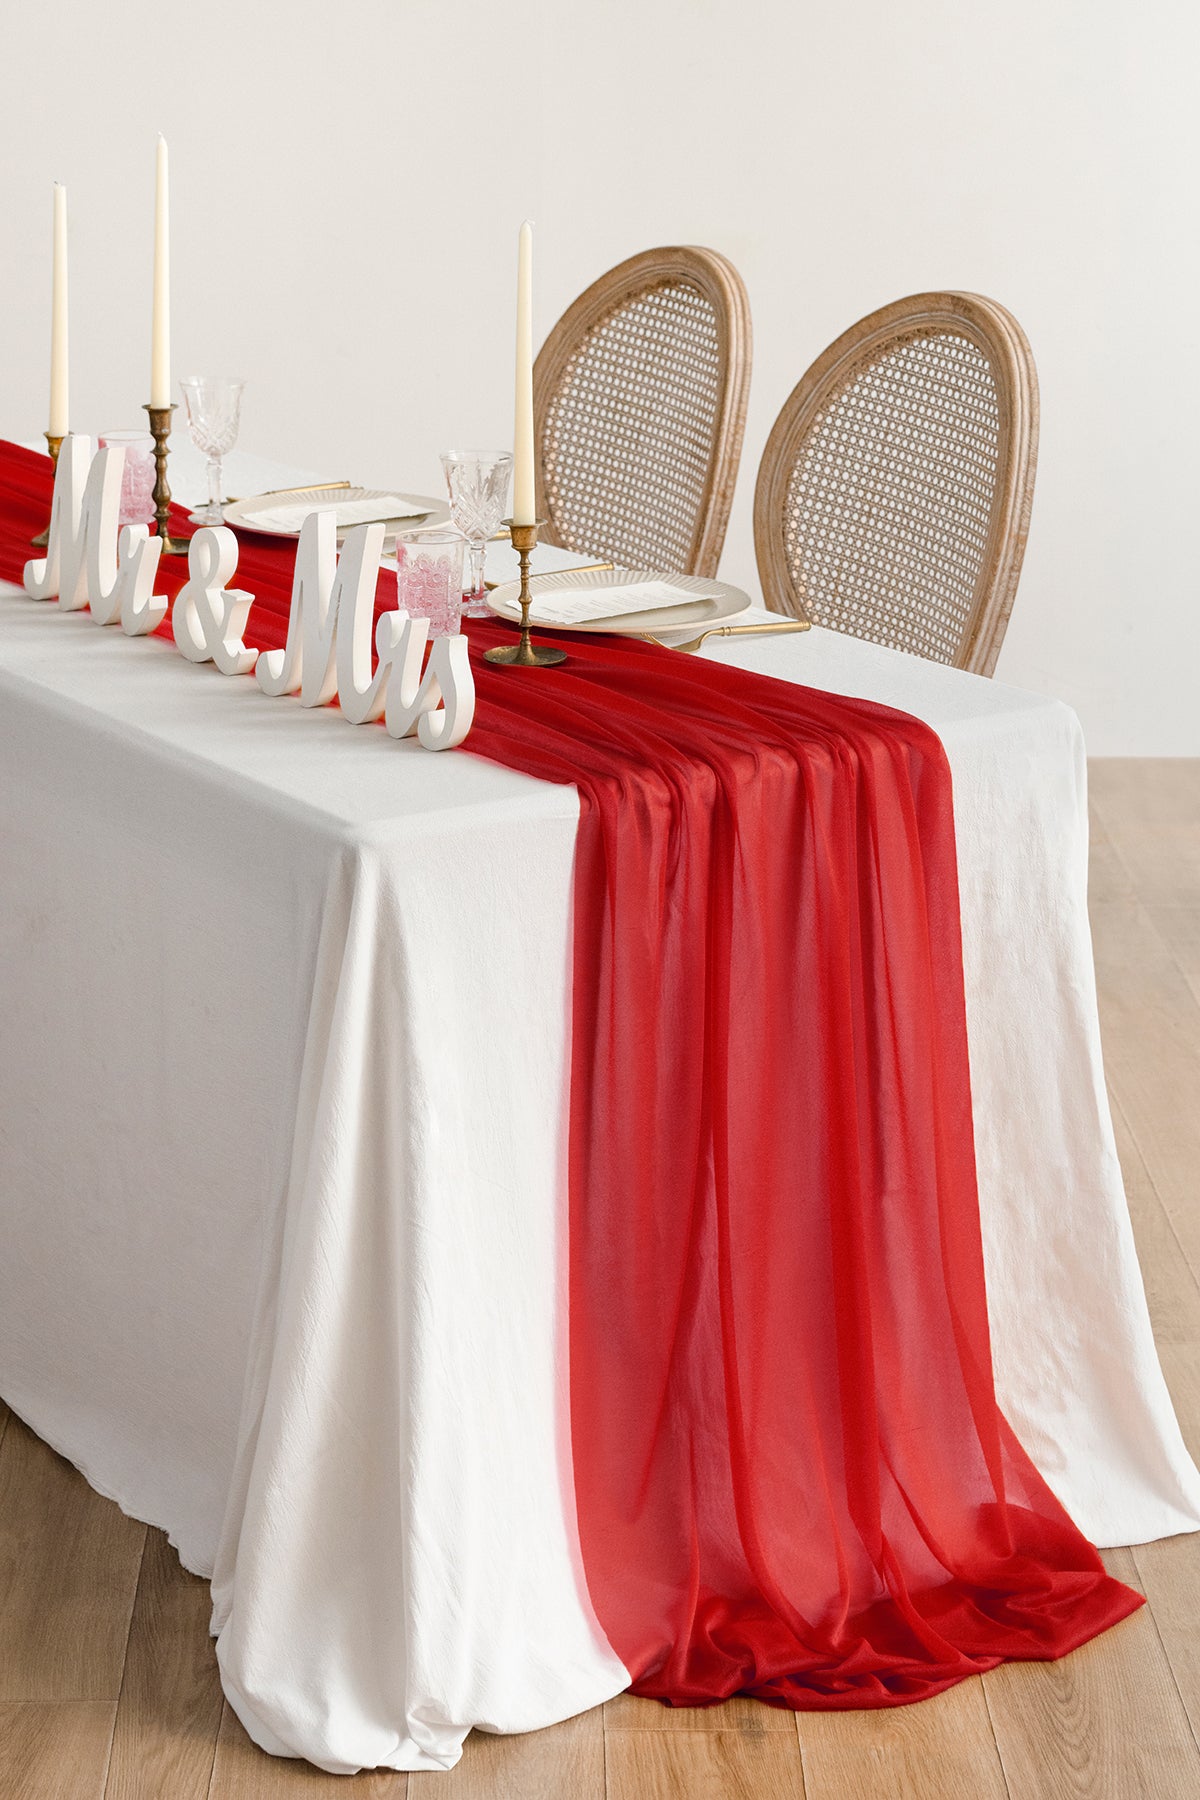 Pre-Arranged Wedding Decor Package in Christmas Red & Sparkle